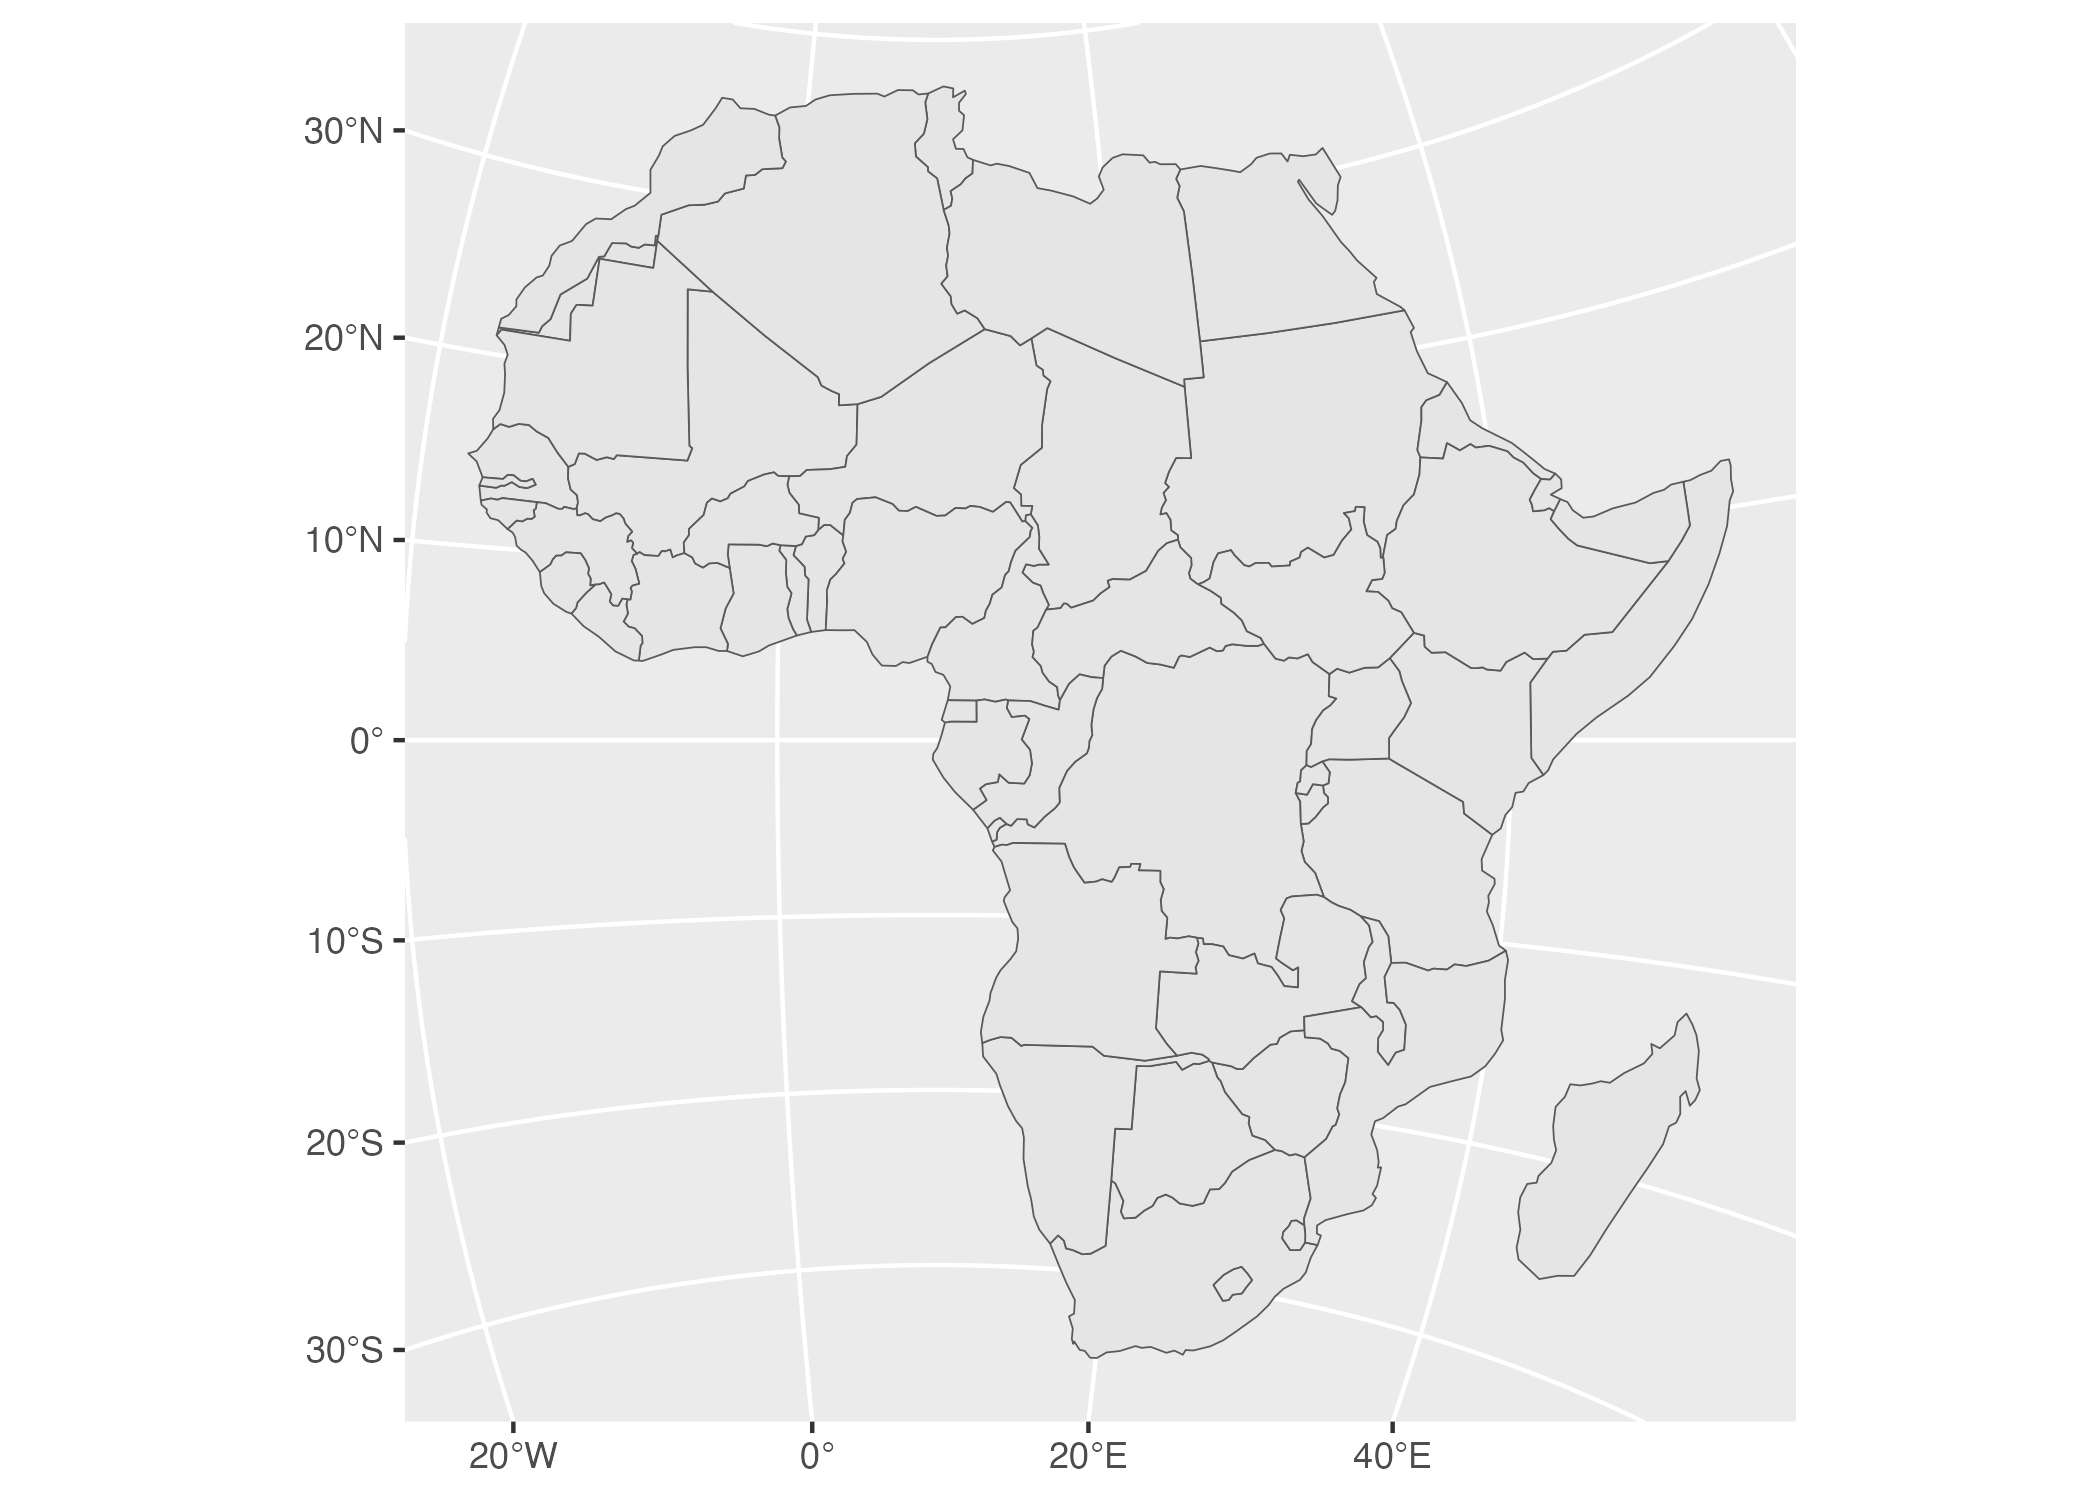 A map of Africa made with projection number 28232